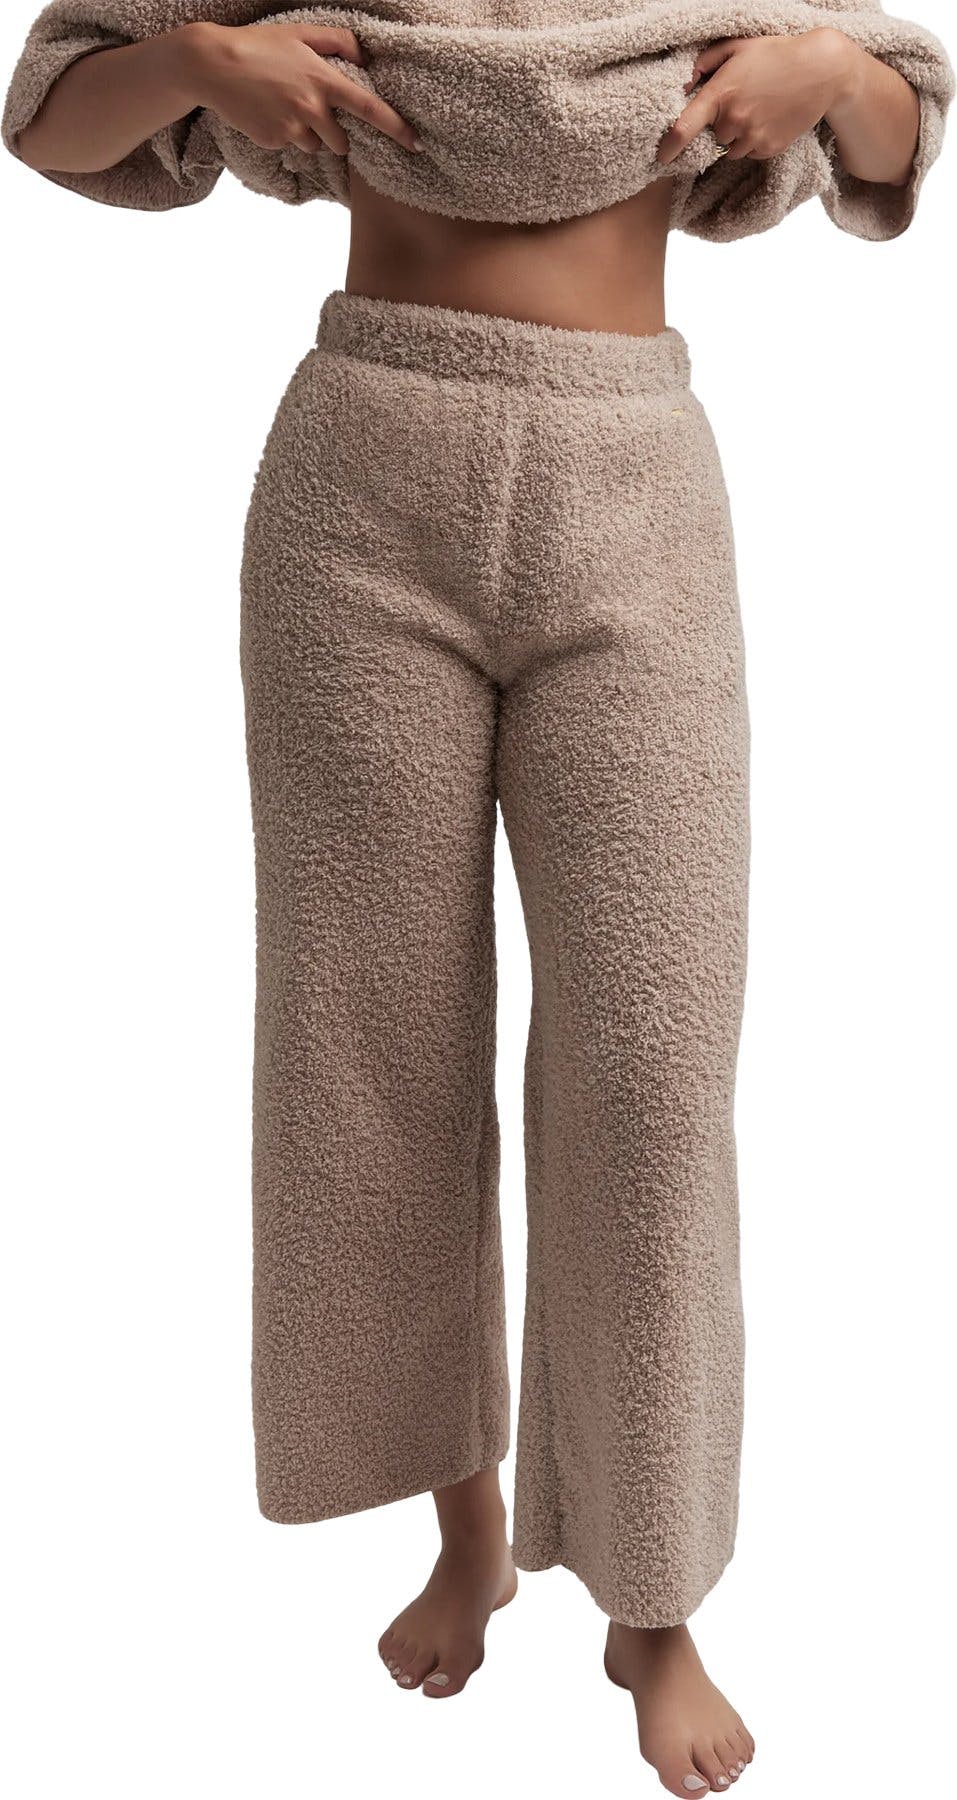 Product image for Home Pants - Women's